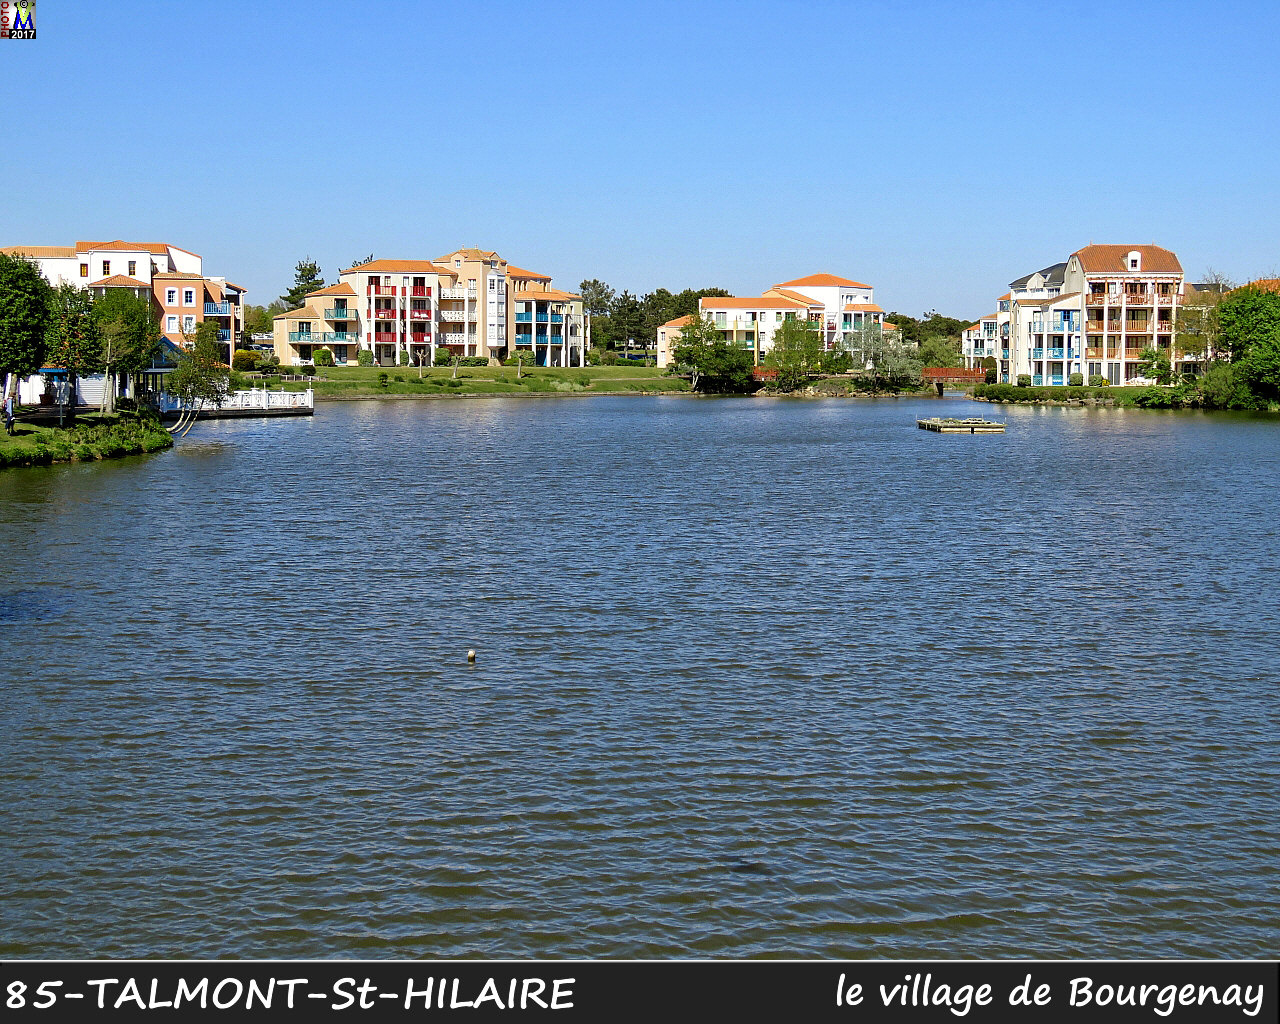 85TALMONT-StHILAIRE_Bourgenay_1200.jpg